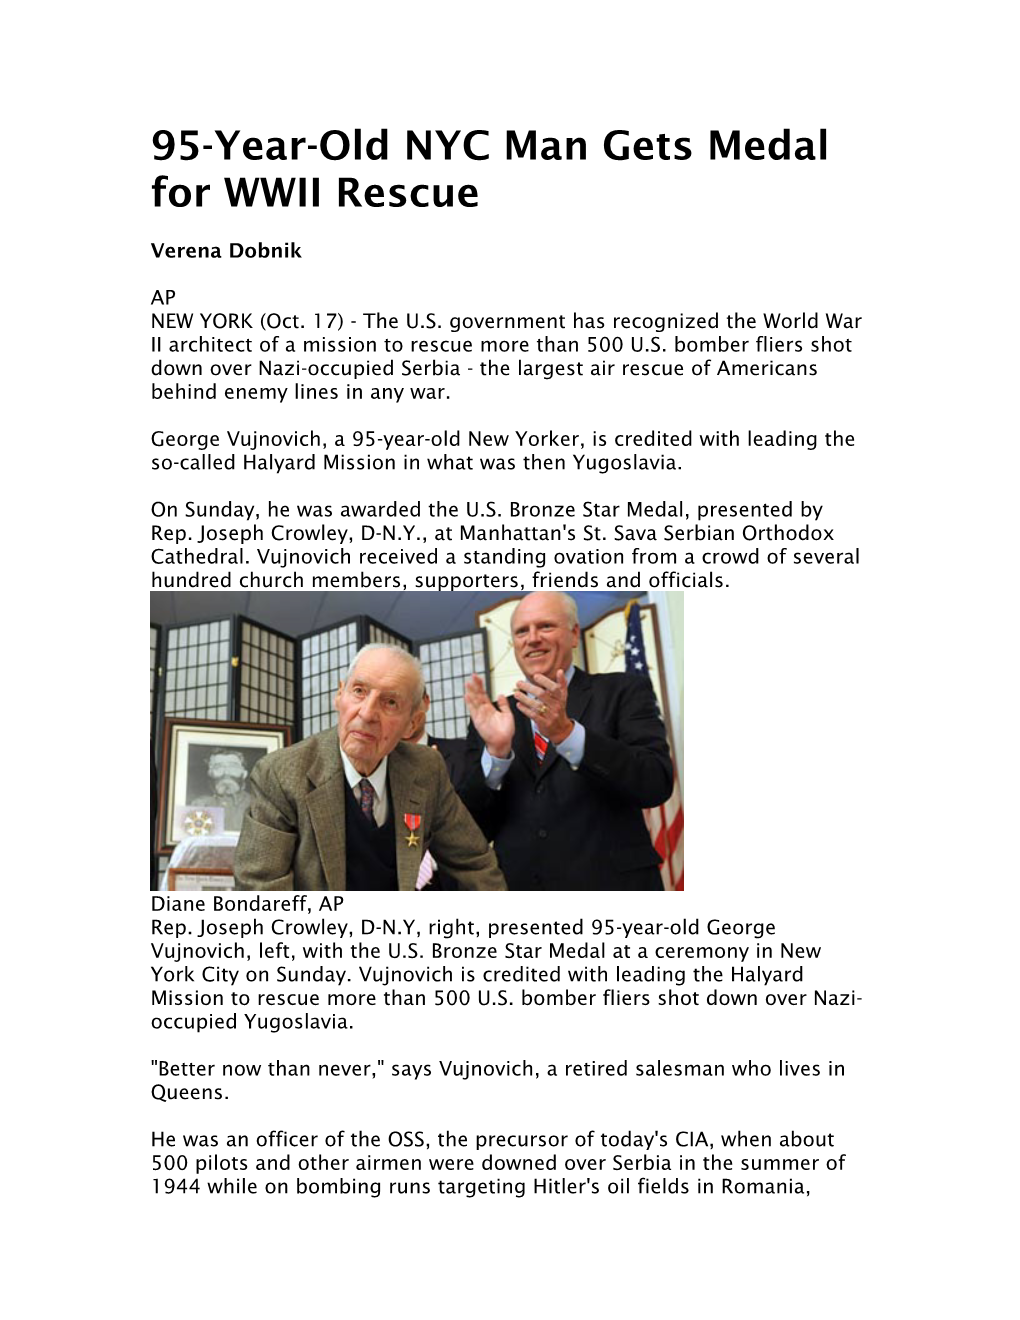 95-Year-Old NYC Man Gets Medal for WWII Rescue